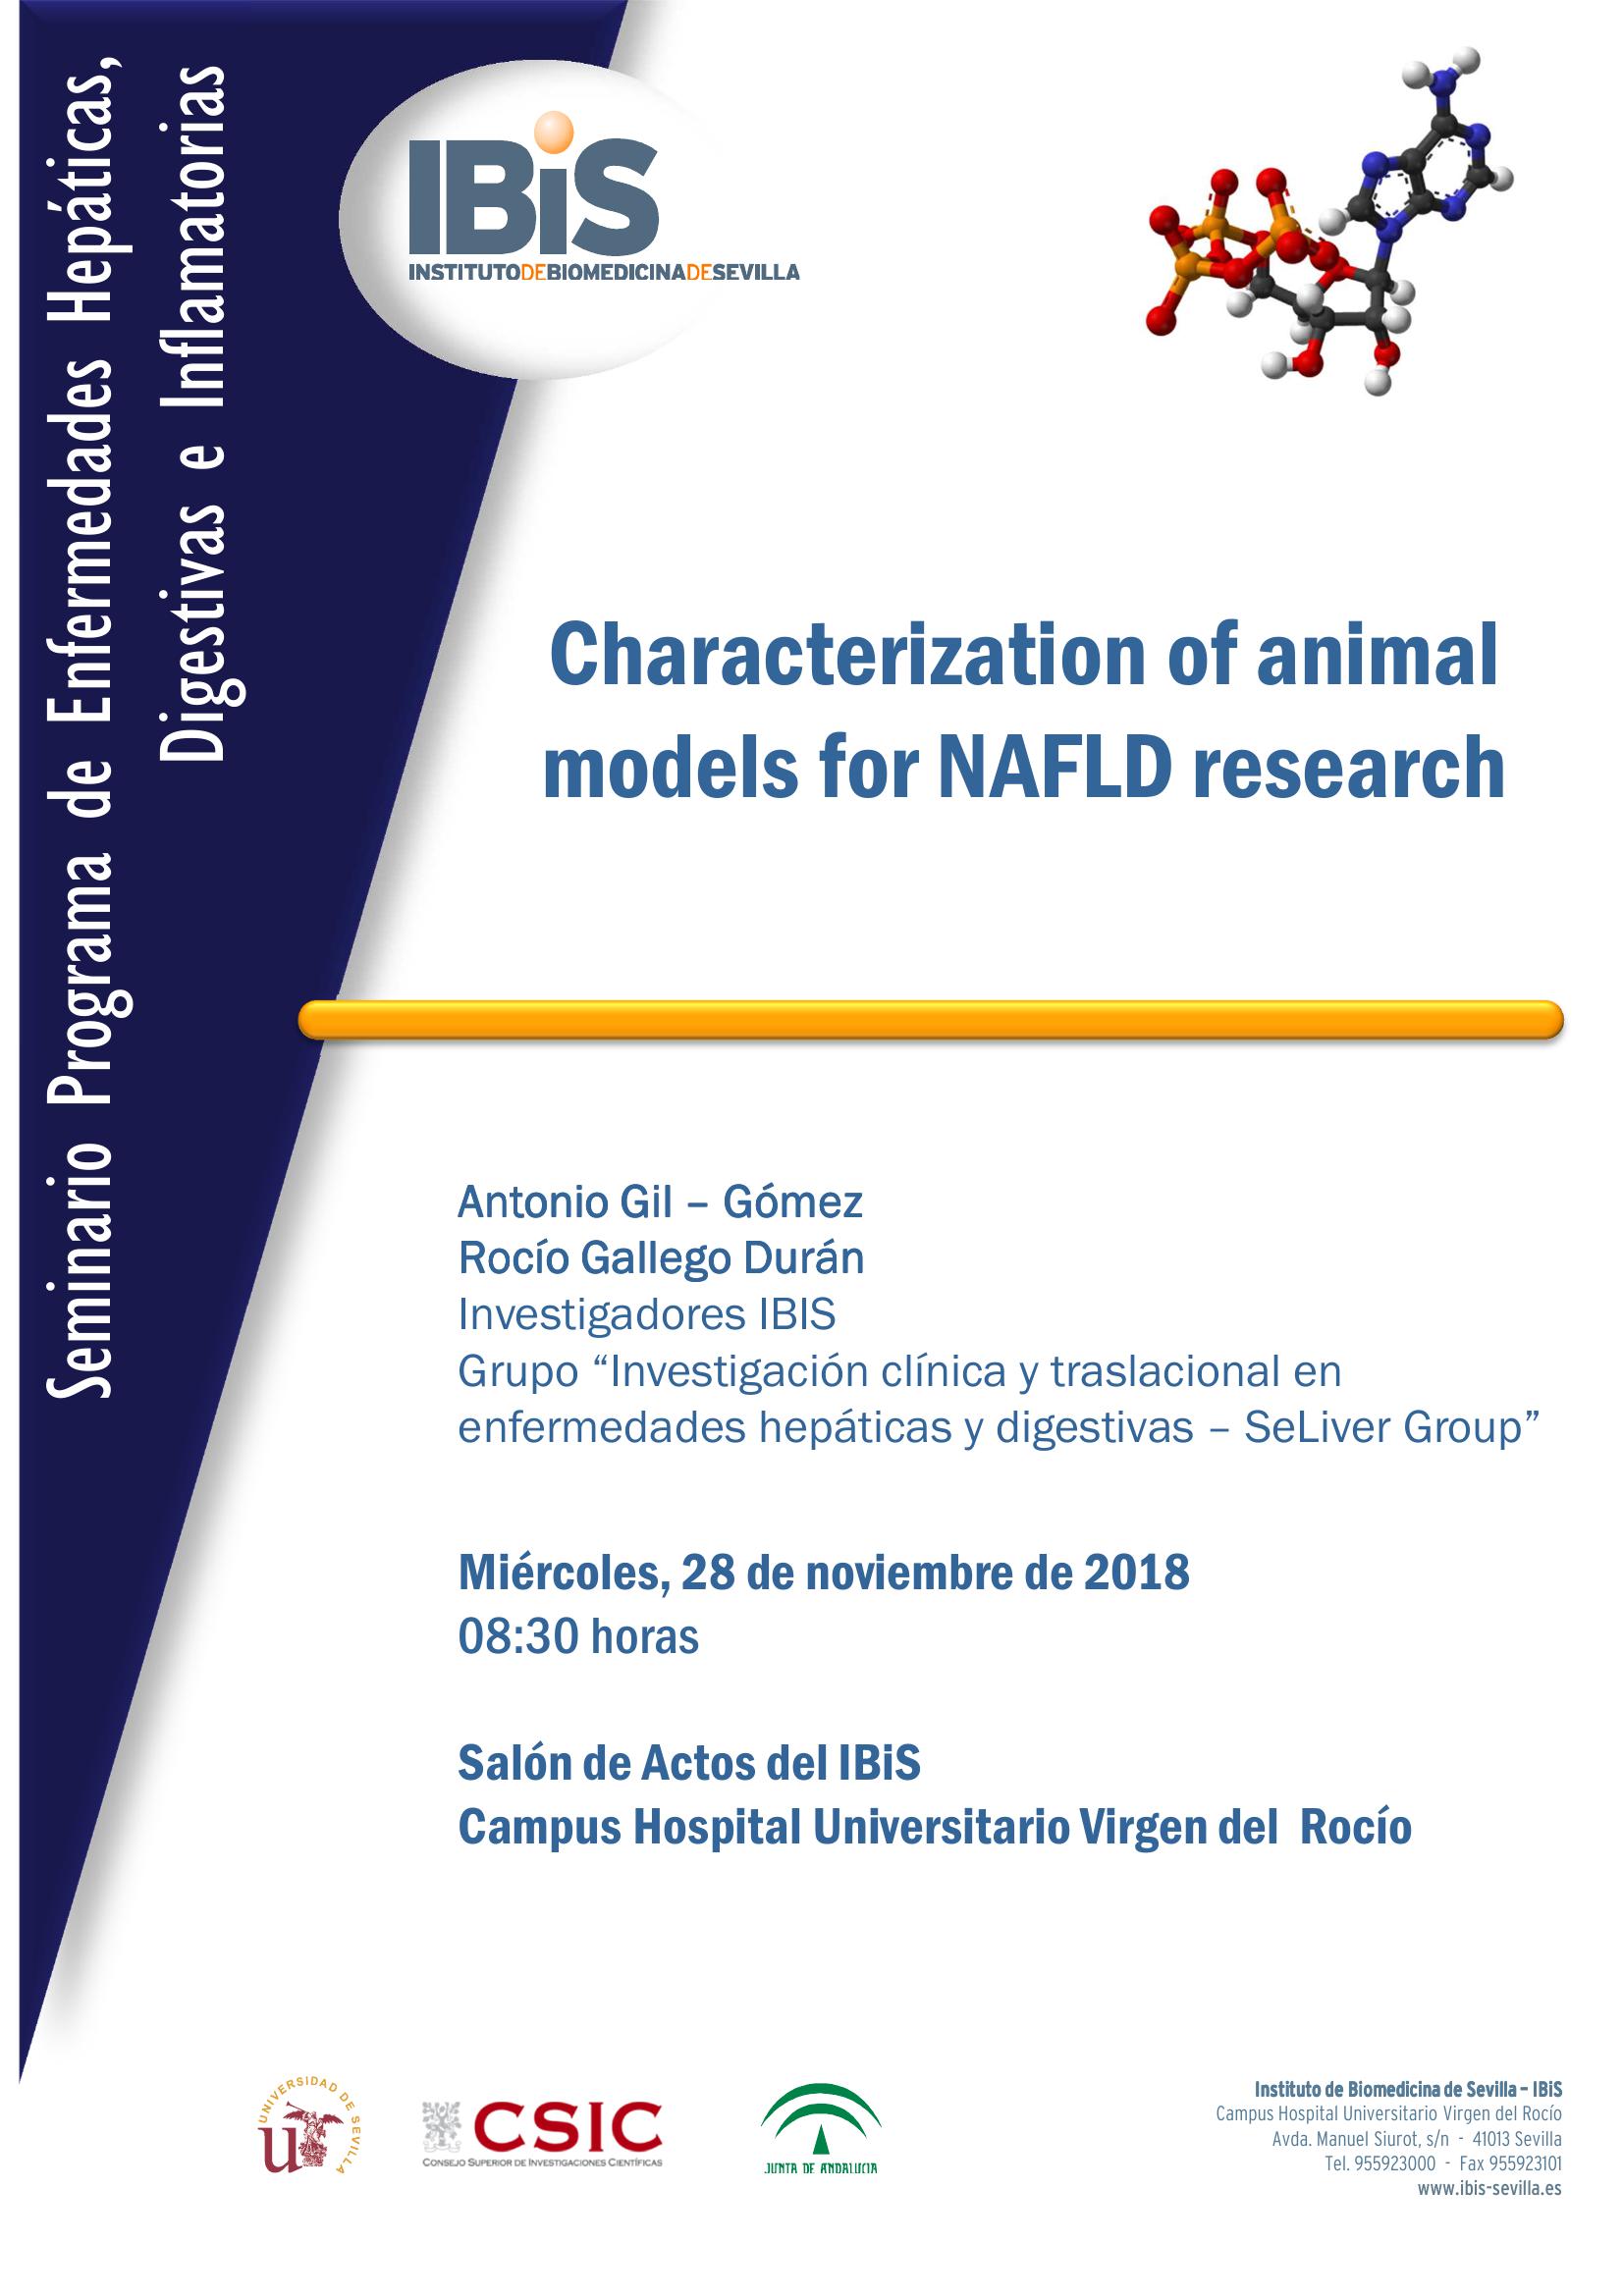 Poster: Characterization of animal models for NAFLD research